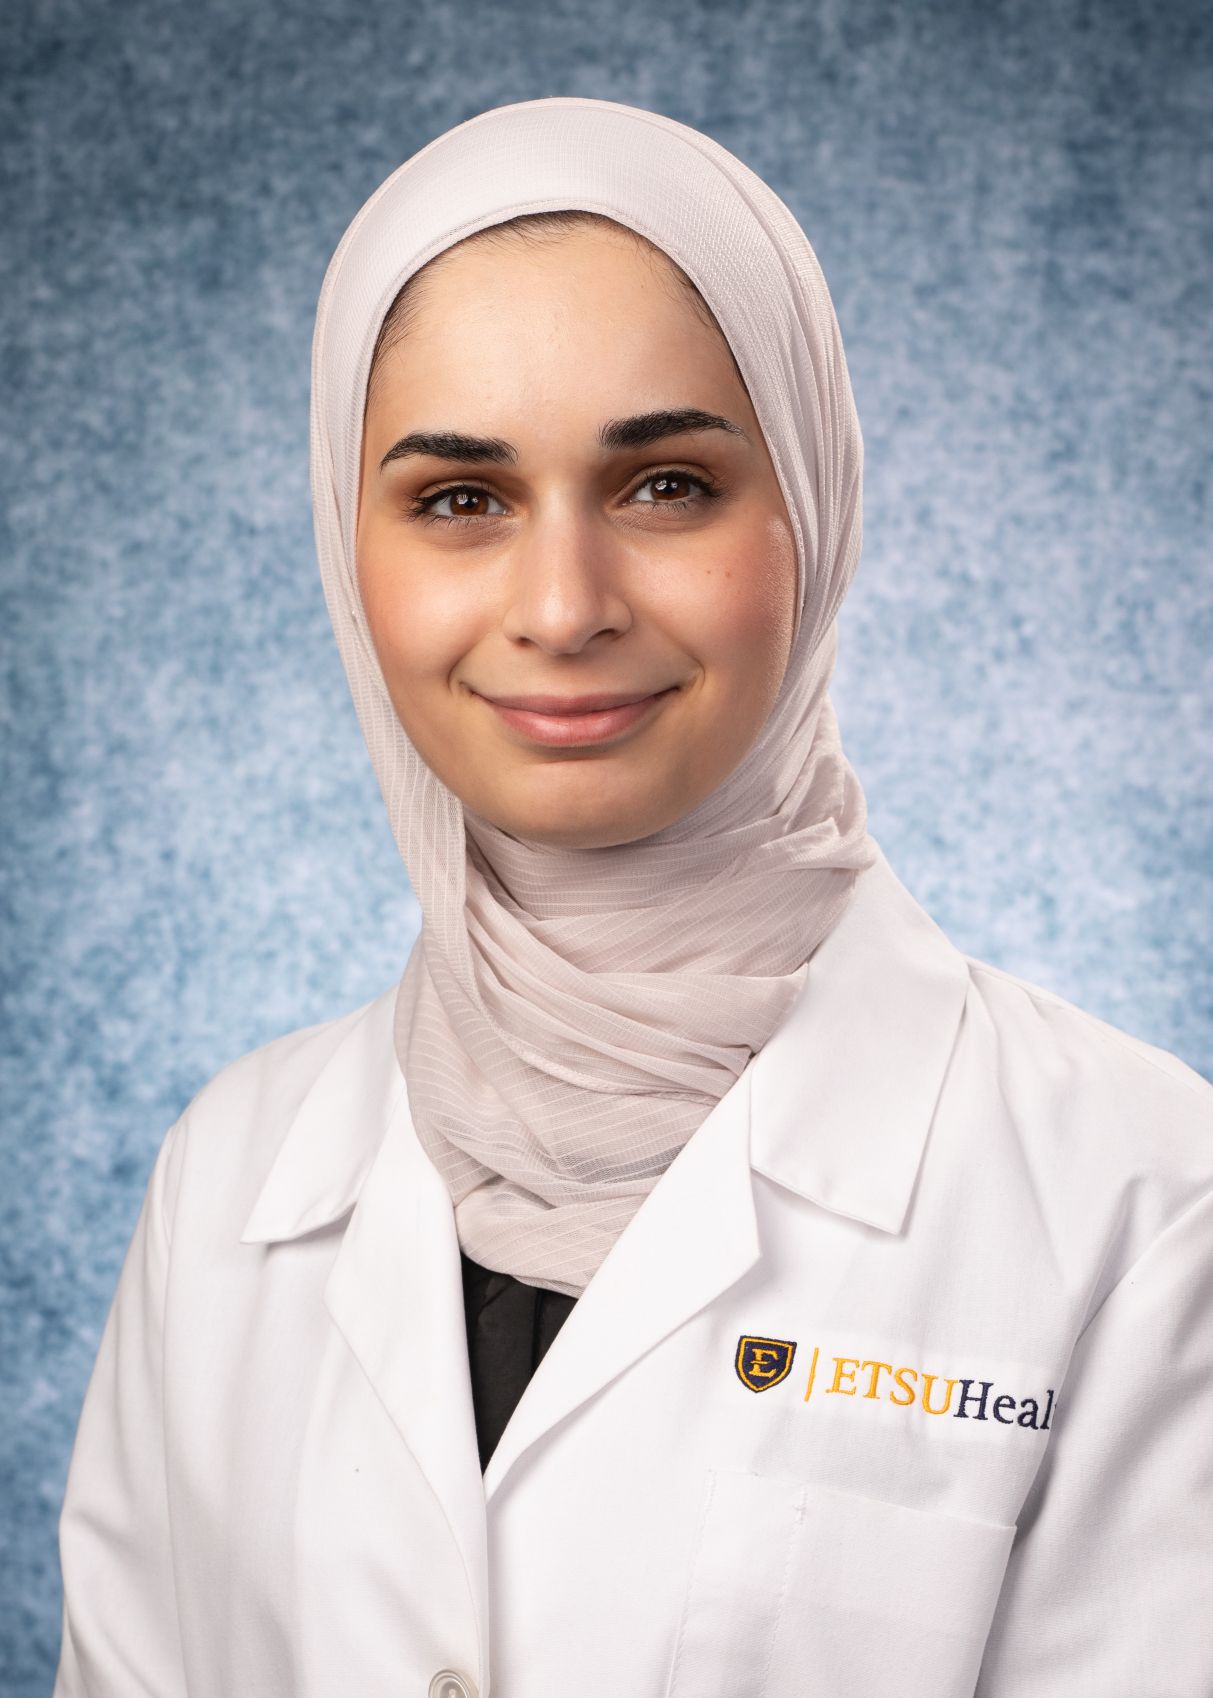 Photo of Amira Eftaiha, MBBS Jordan University of Science and Technology Faculty of Medicine